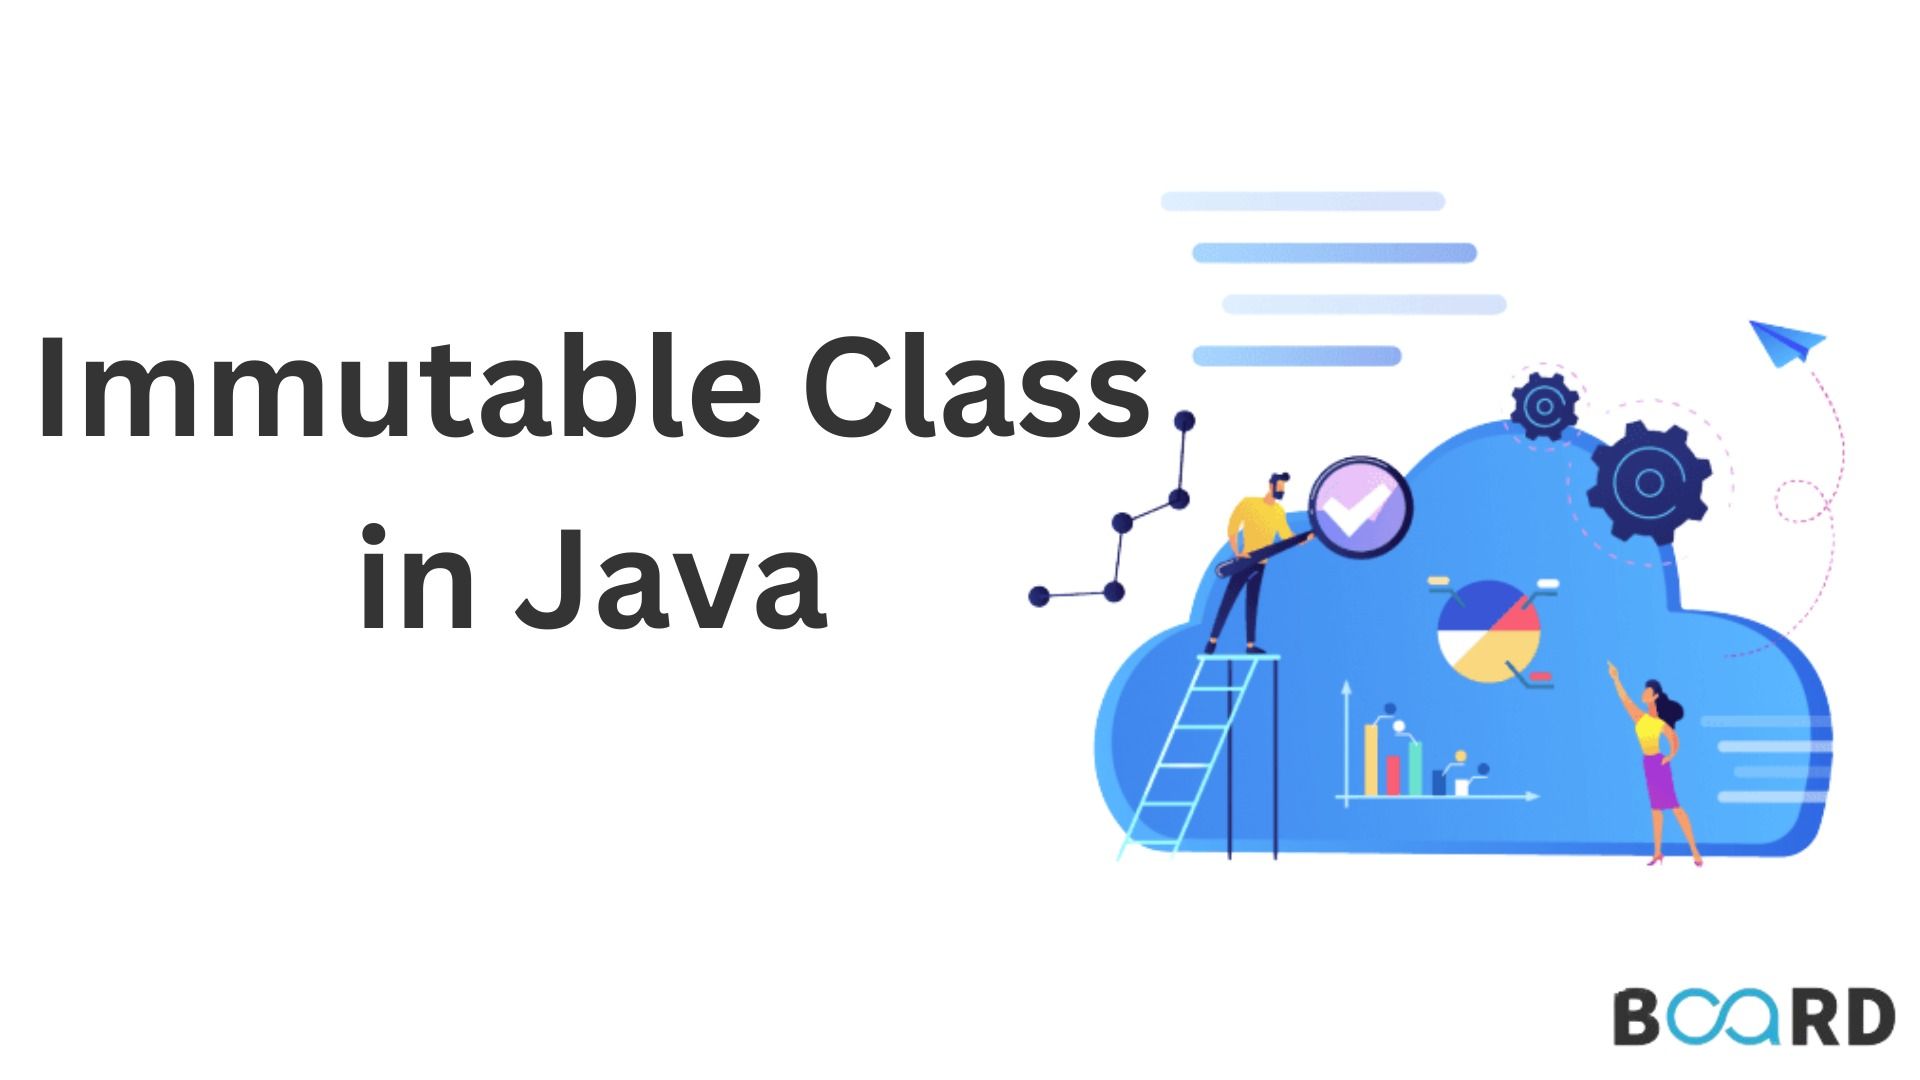 What is Immutable Class in Java?